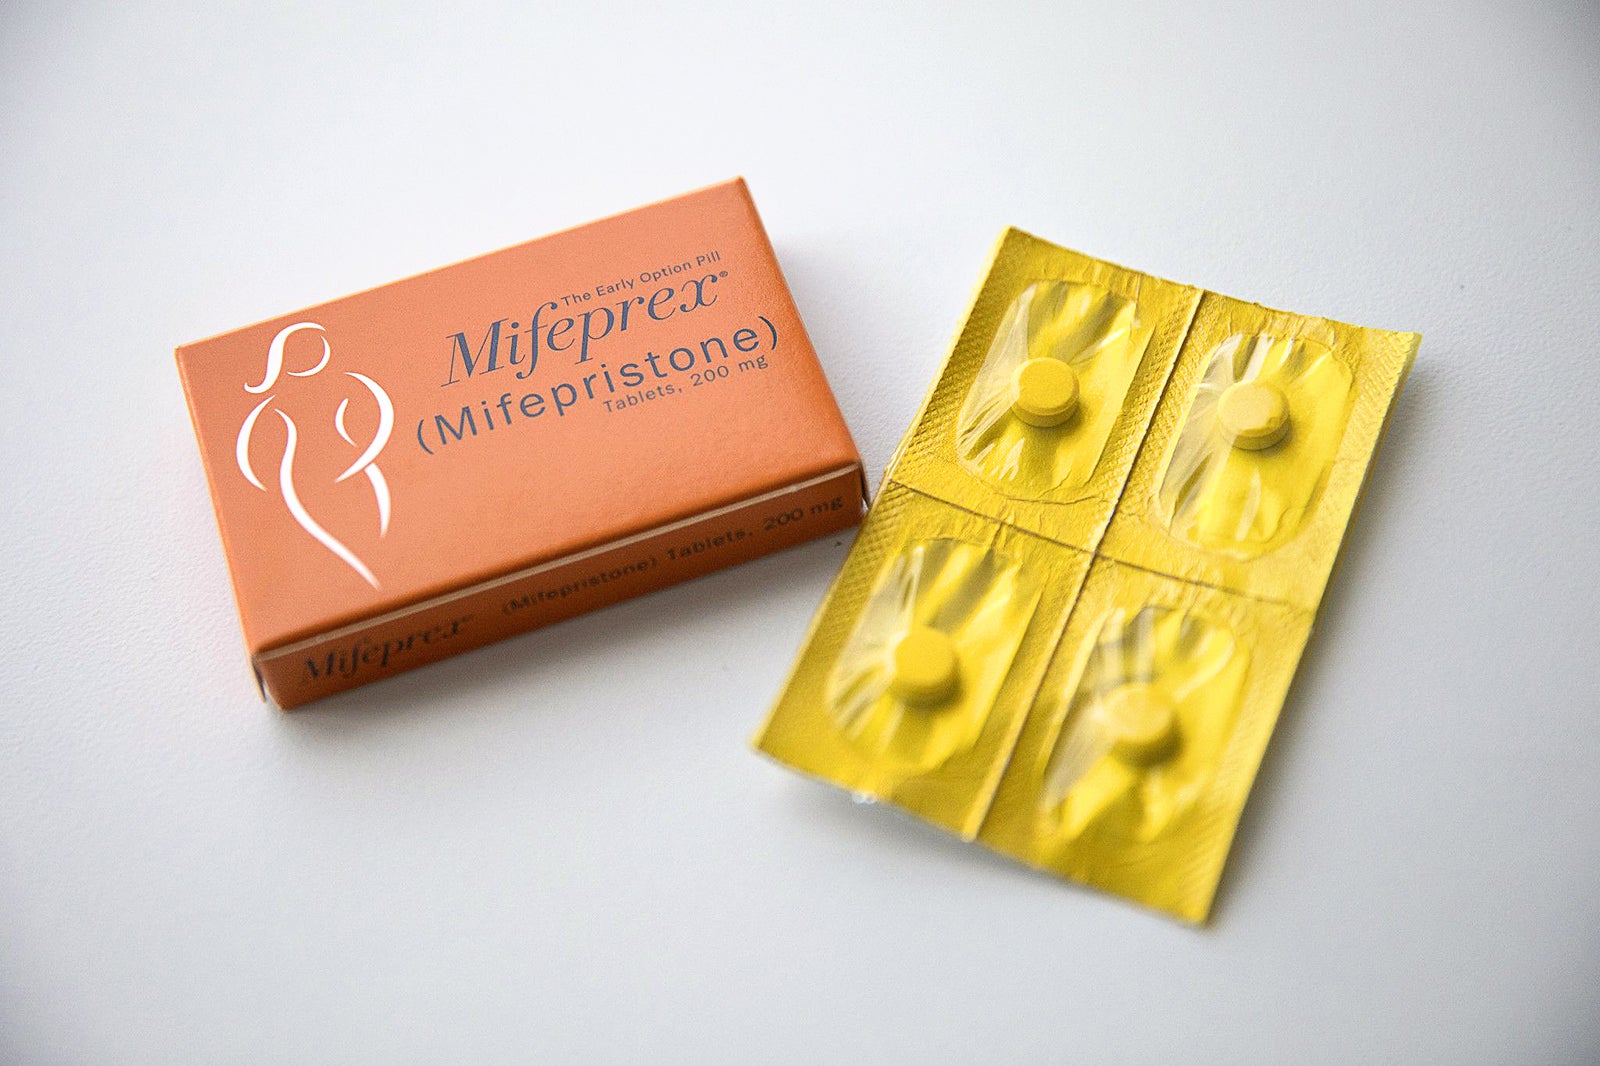 Flimsy Antiabortion Studies Cited in Case to Ban Mifepristone Are Retracted